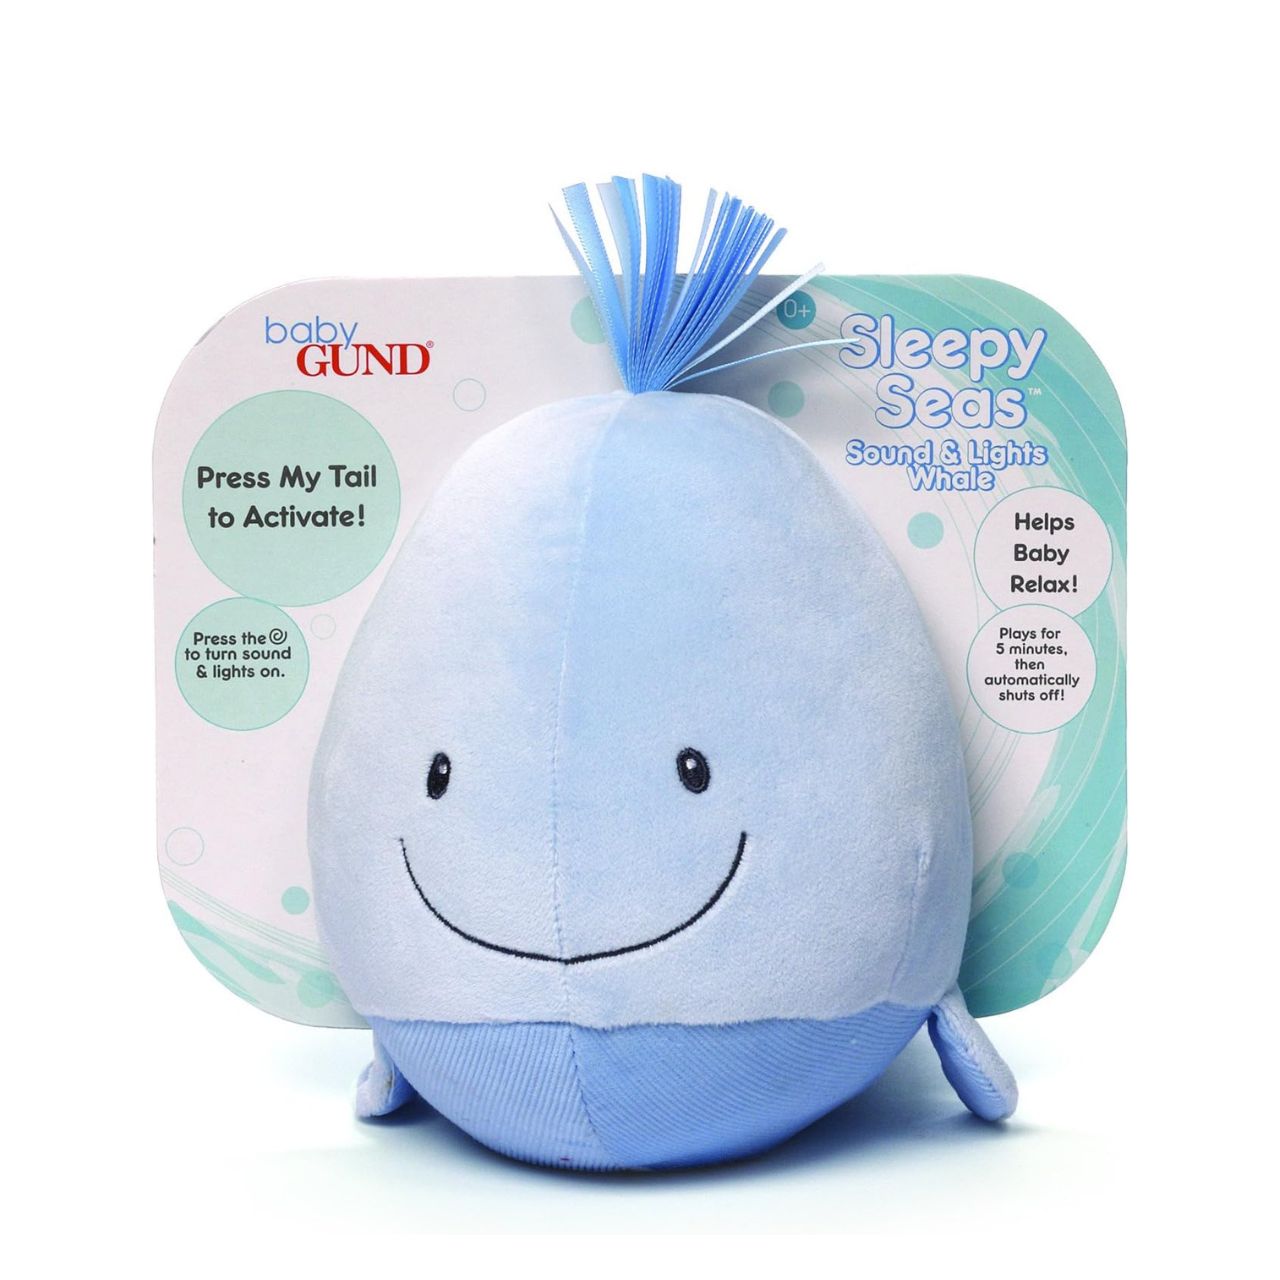 GUND Baby Sleepy Sea's Sound Whale - Small  This musical plush toy will help your babies drift off to sleep. The whale is presented in an oh-so-soft light blue fabric, with blue ribbons for its hair, and dark embroidery creating a smiling face. Press the left fin and the animated whale splashes into life. Press the musical note on its right fin and the plush starts to play one of five different noises: